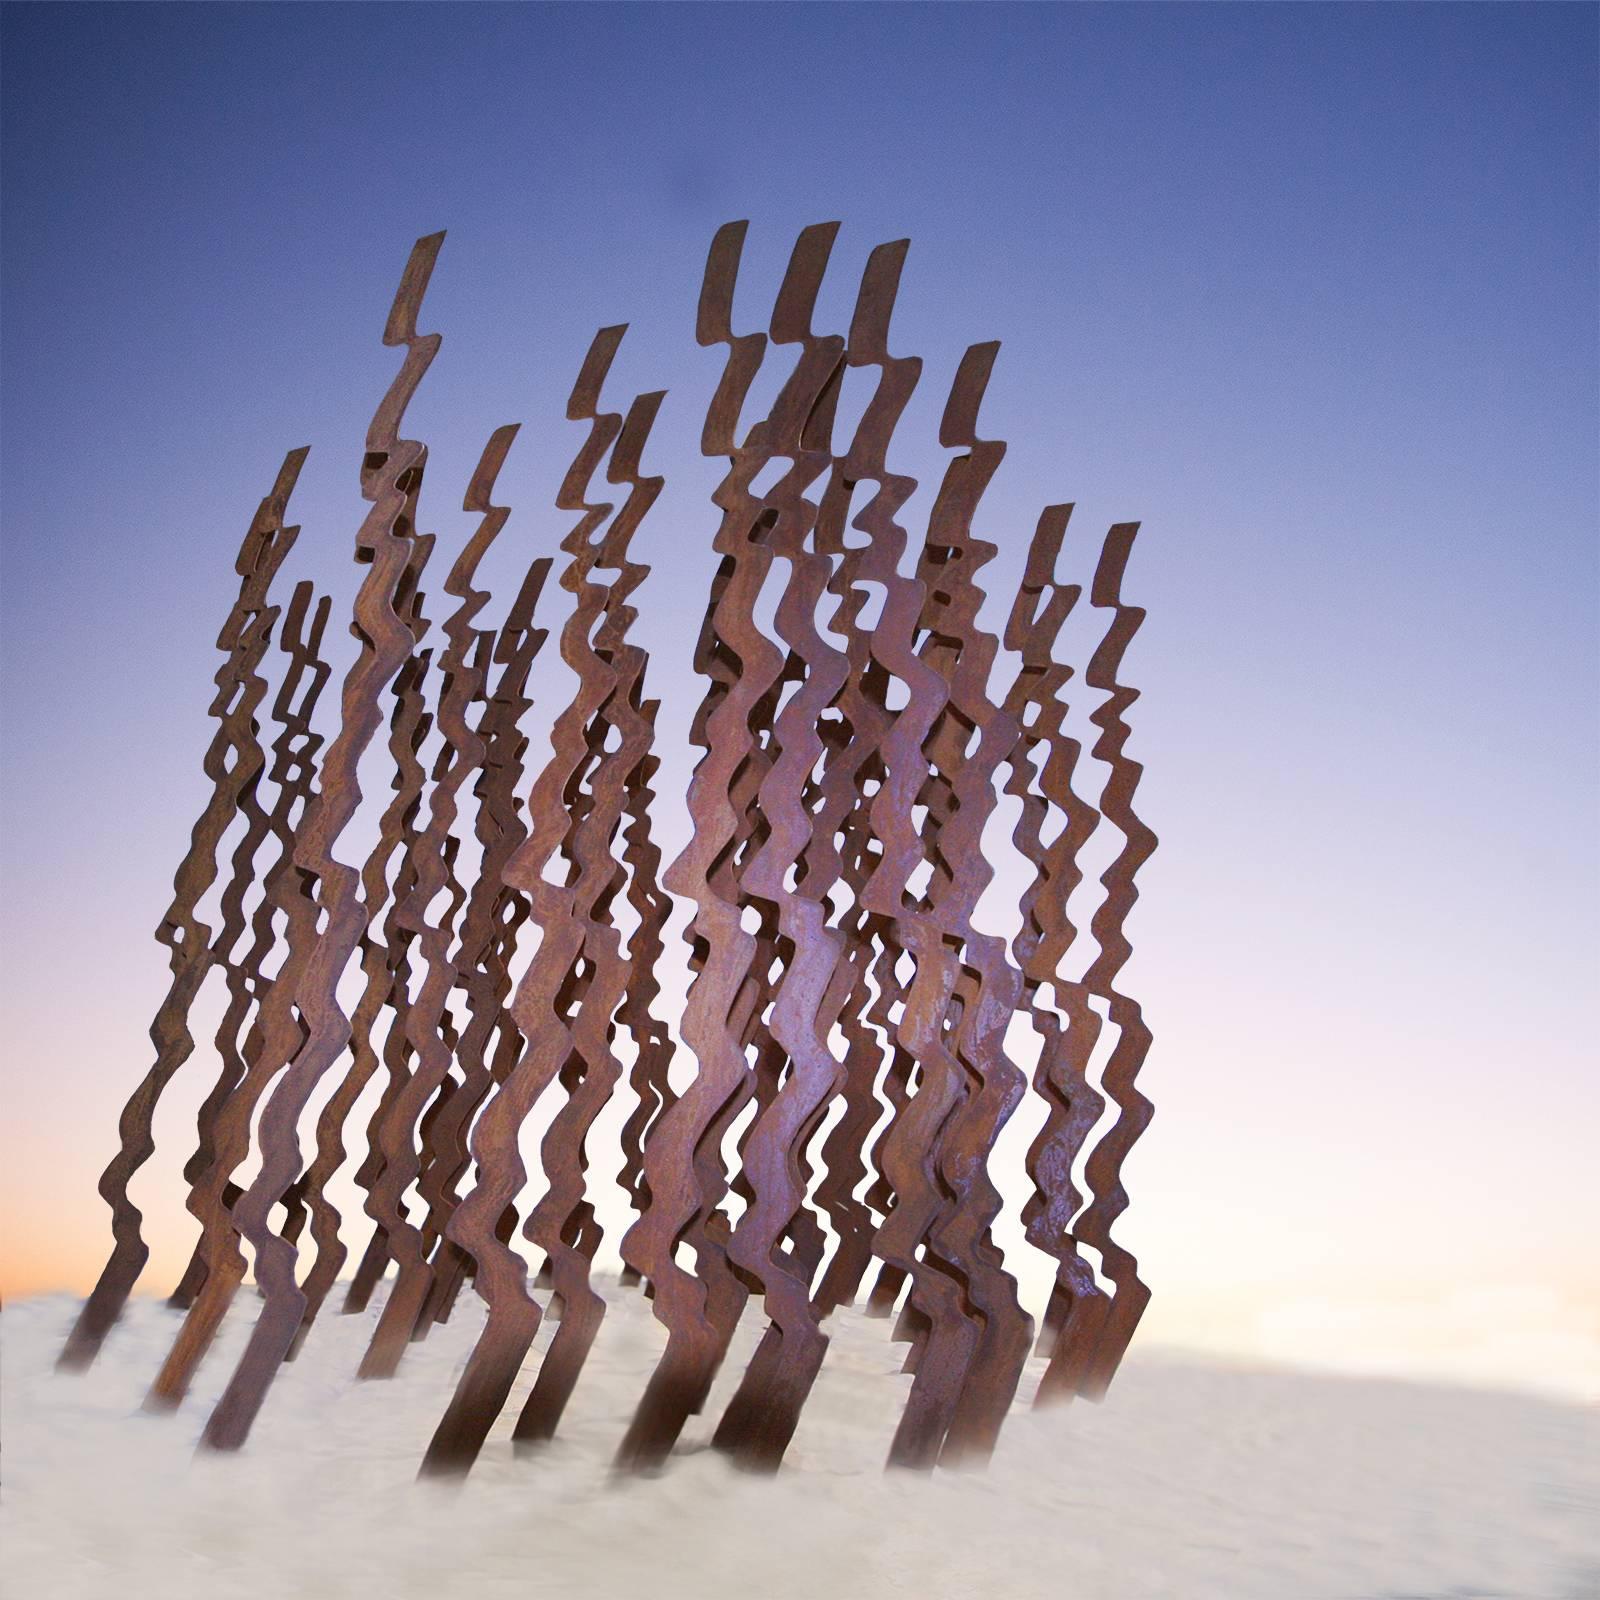 Steel (Corten) 
Each wave is H 59 x 2 x 0.25 in. 
Sold separately, you can buy as many as you need and create your own installation and design.
Each wave is signed by the artists.

YOLANDA & H sculptures demonstrates the interconnection and reliance